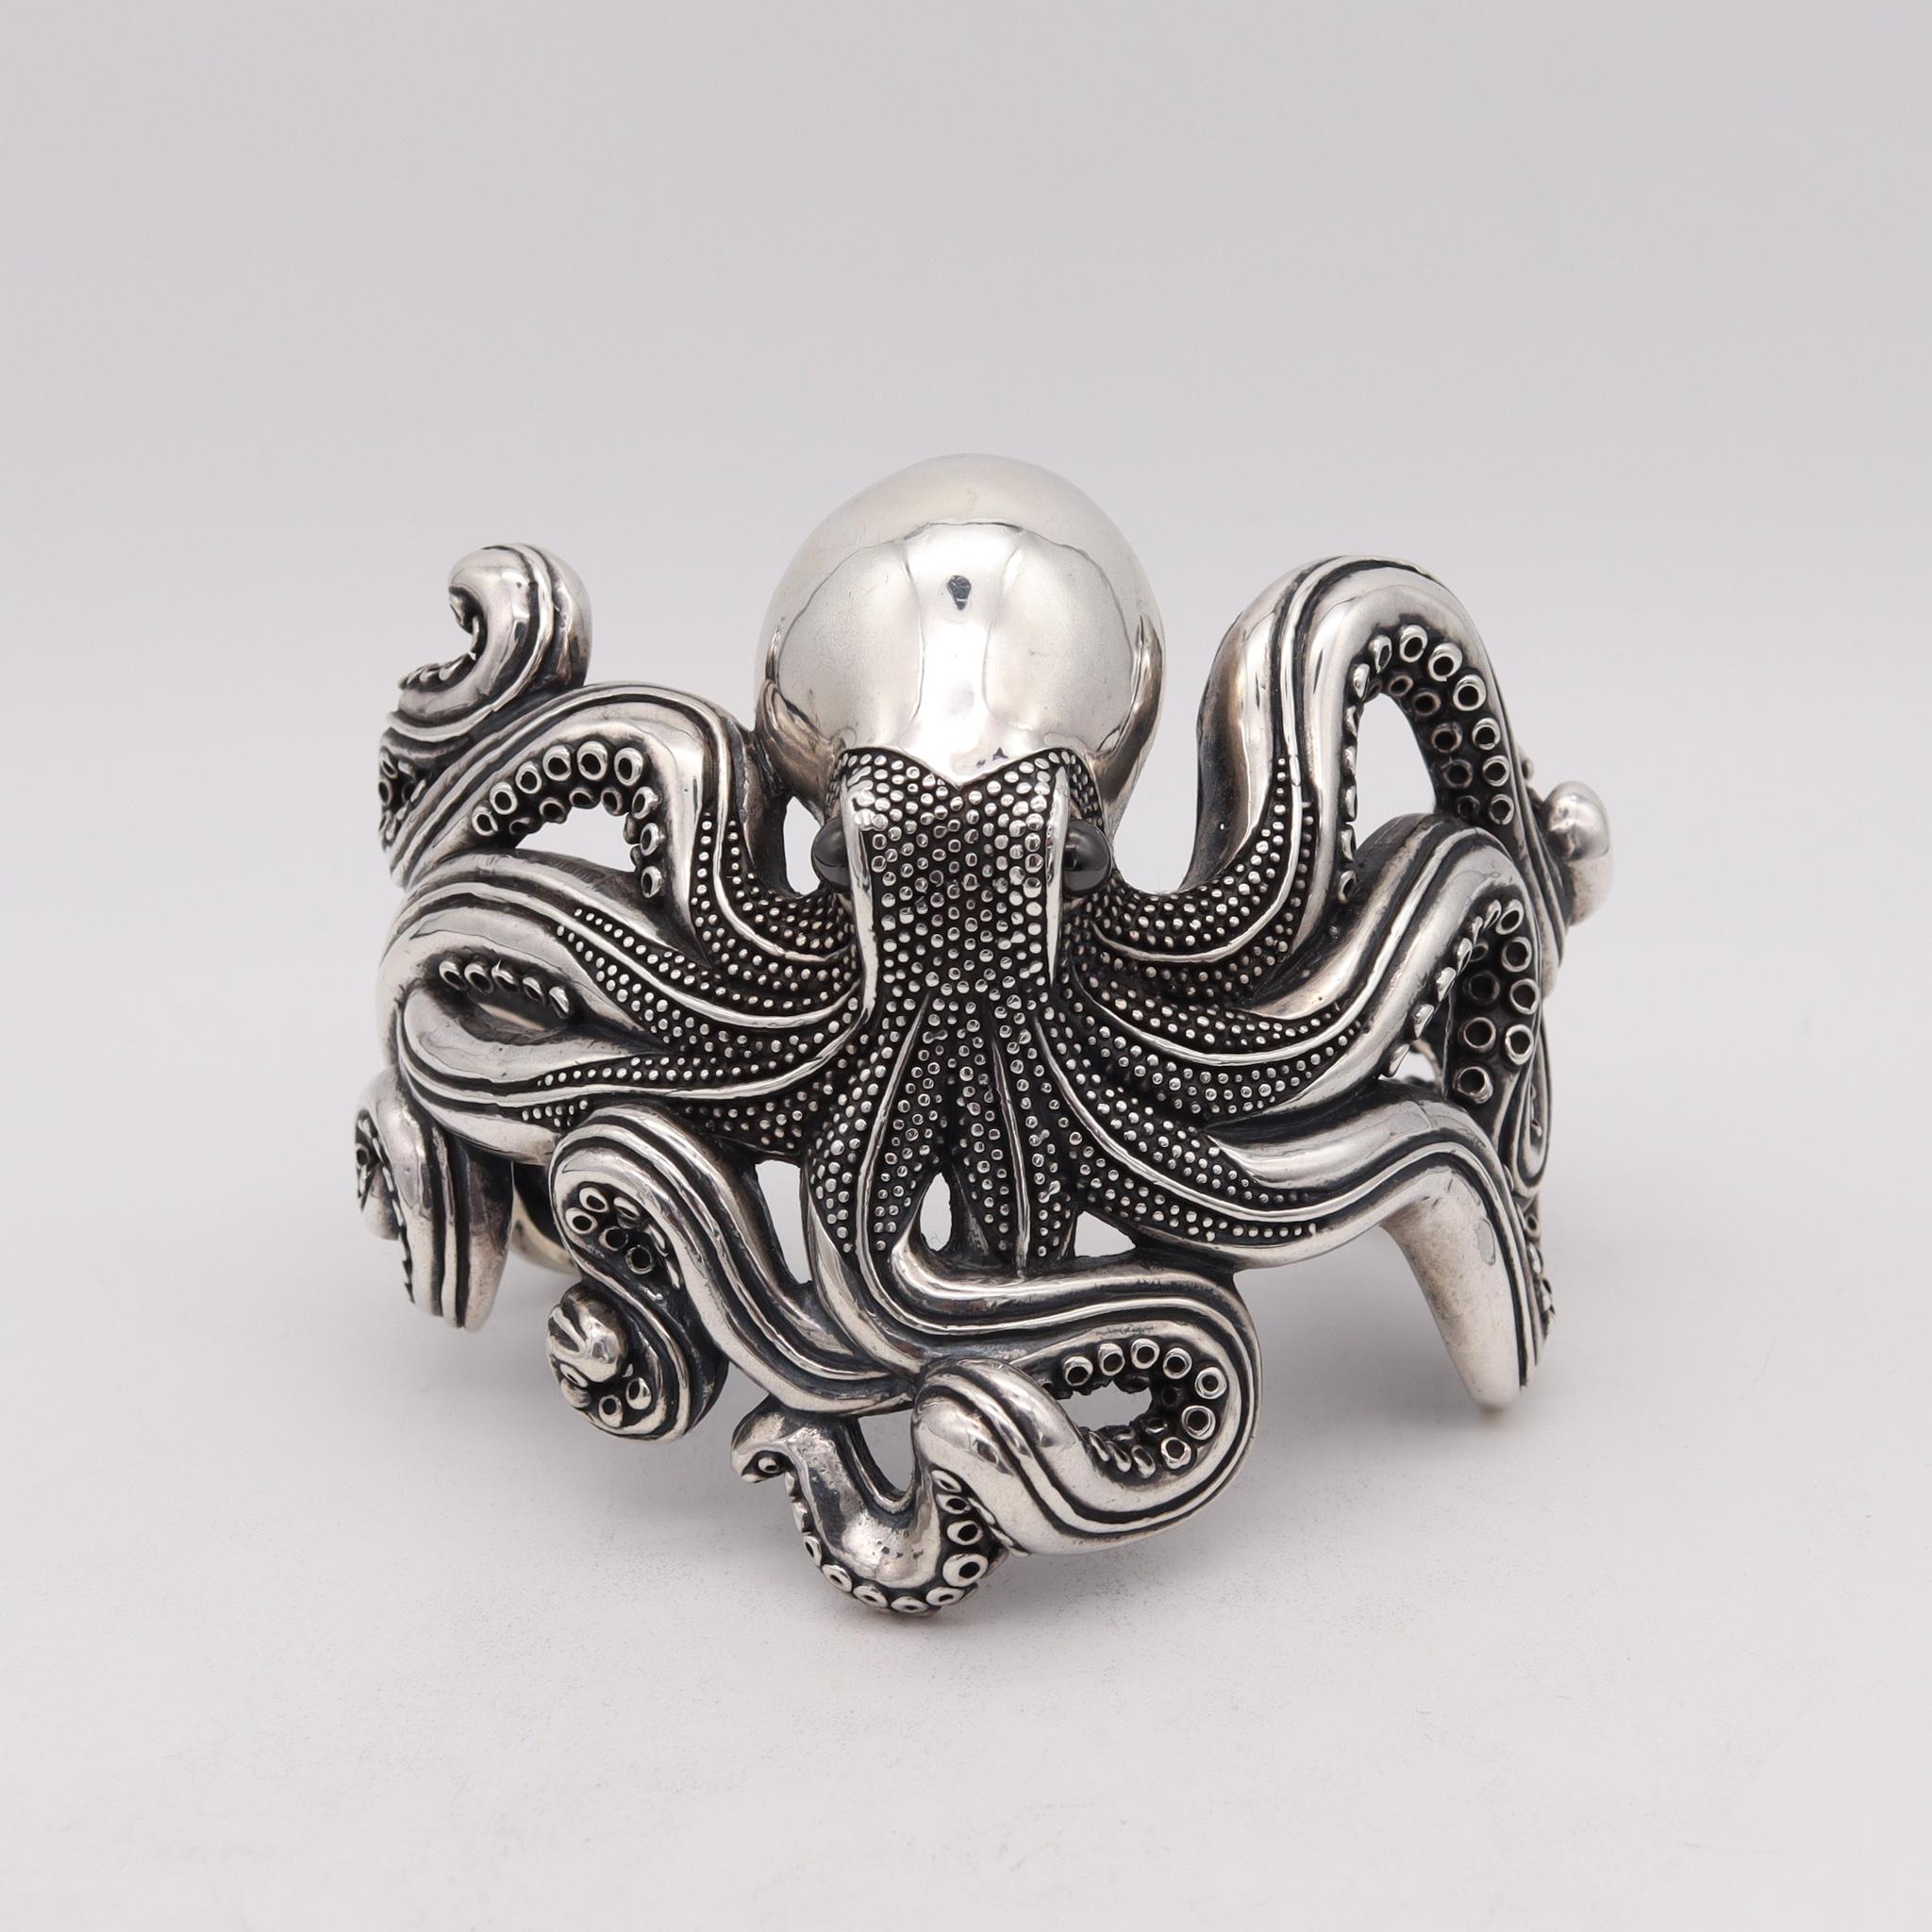 An octopus wrist-arm cuff bracelet.

Fabulous oversized piece, crafted in solid sterling silver .925/.999 in the shape of a big octopus. It was carefully designed with highly textured surfaces and intricate details of the animal. An extremely